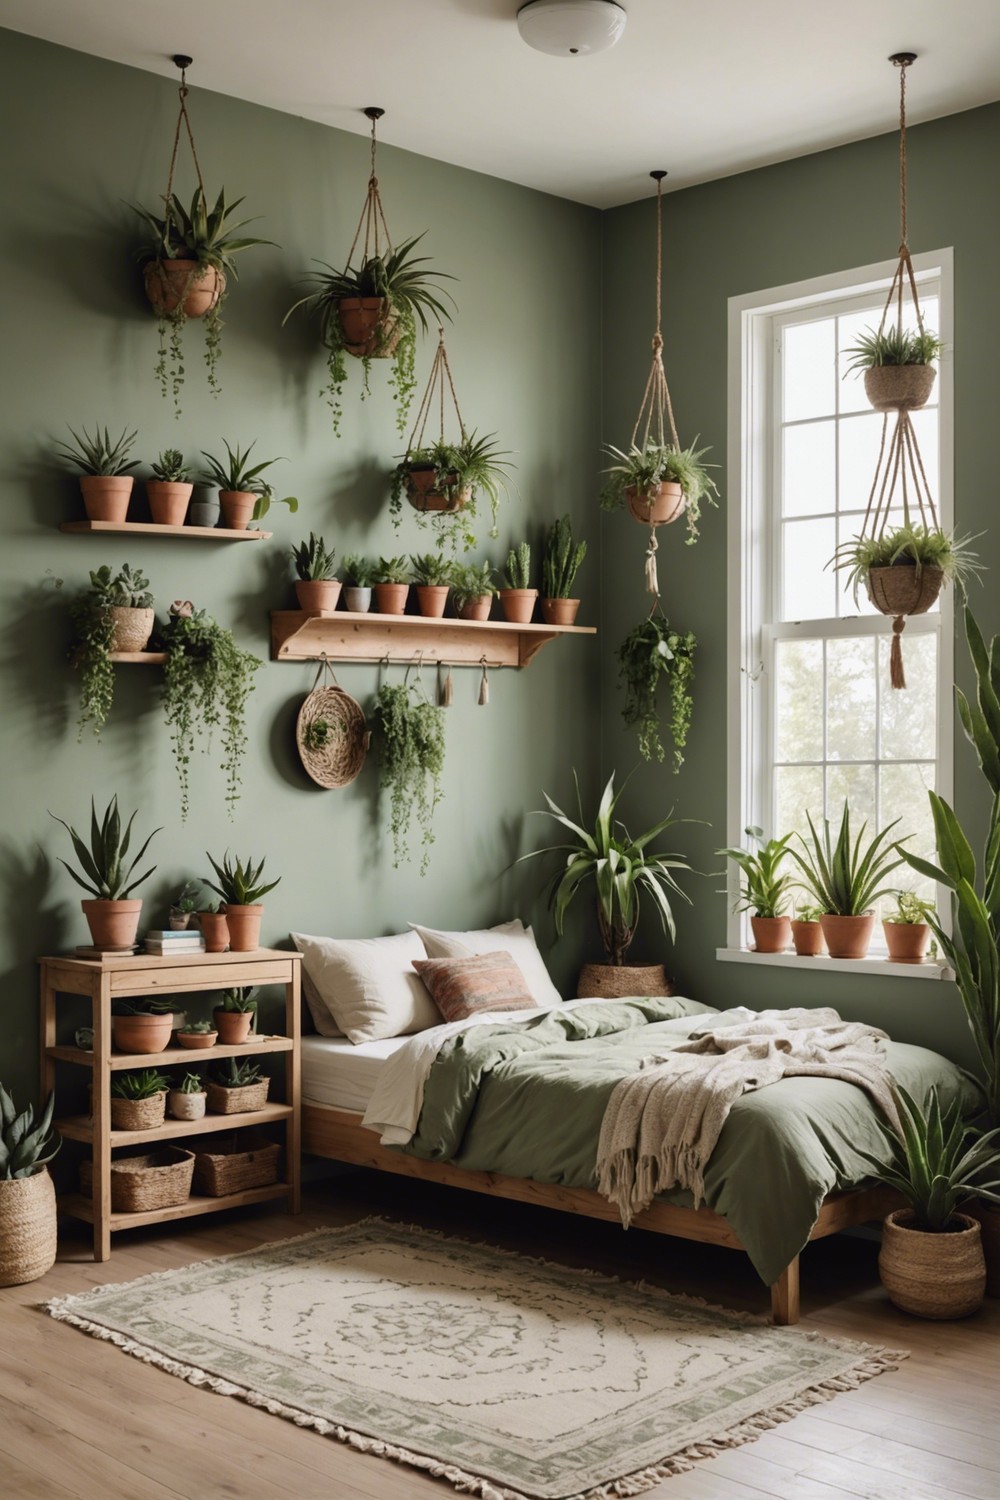 Bring in Plants for a Natural Vibe